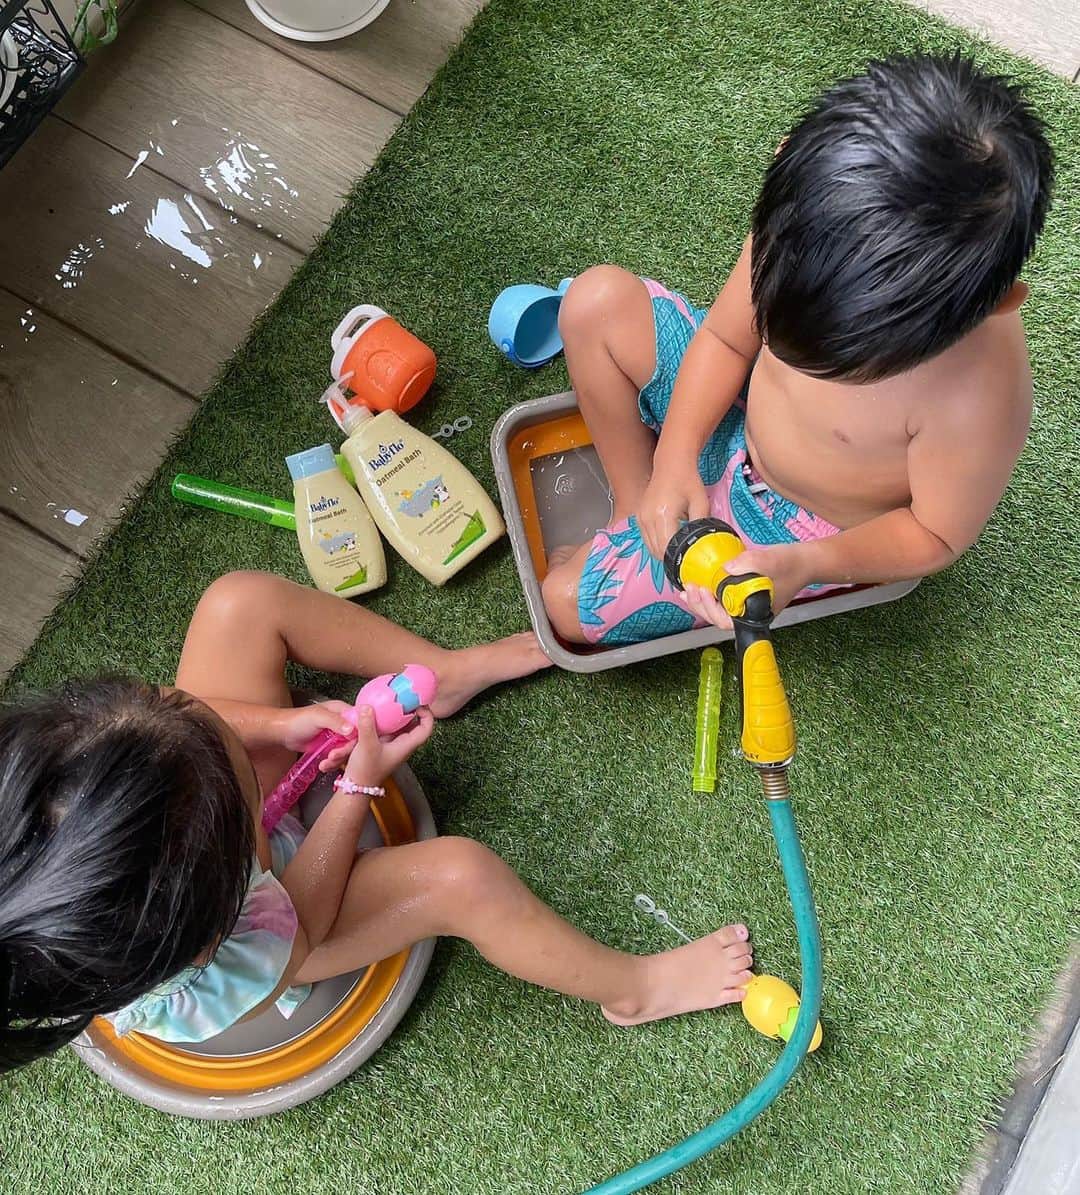 Iya Villaniaのインスタグラム：「Bath time is fun anytime, anywhere! Even if it’s on the balcony in the middle of some water play to beat the heat 😂 Babyflo’s Oatmeal Bath keeping the kiddos clean, moisturized and happy 💙   Available in Philusa Online Store: https://store.philusa.com.ph/collections/babyflo」